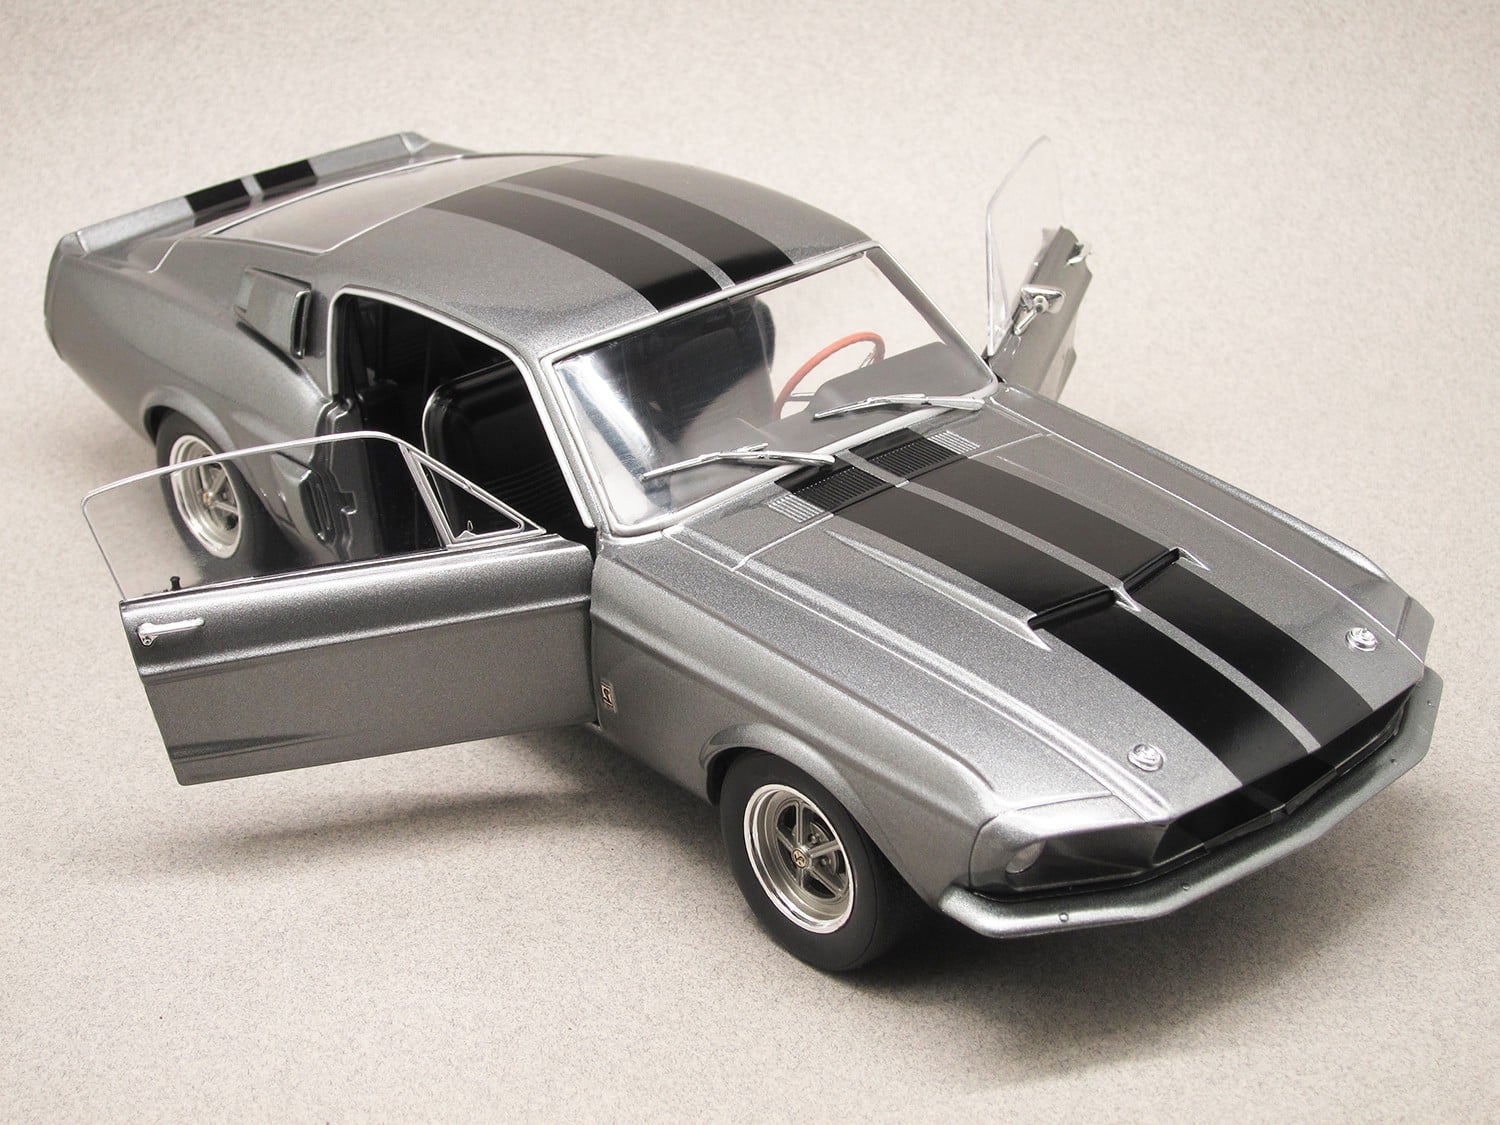 Ford Mustang Shelby 500 GT 1967 (Solido) 1:18